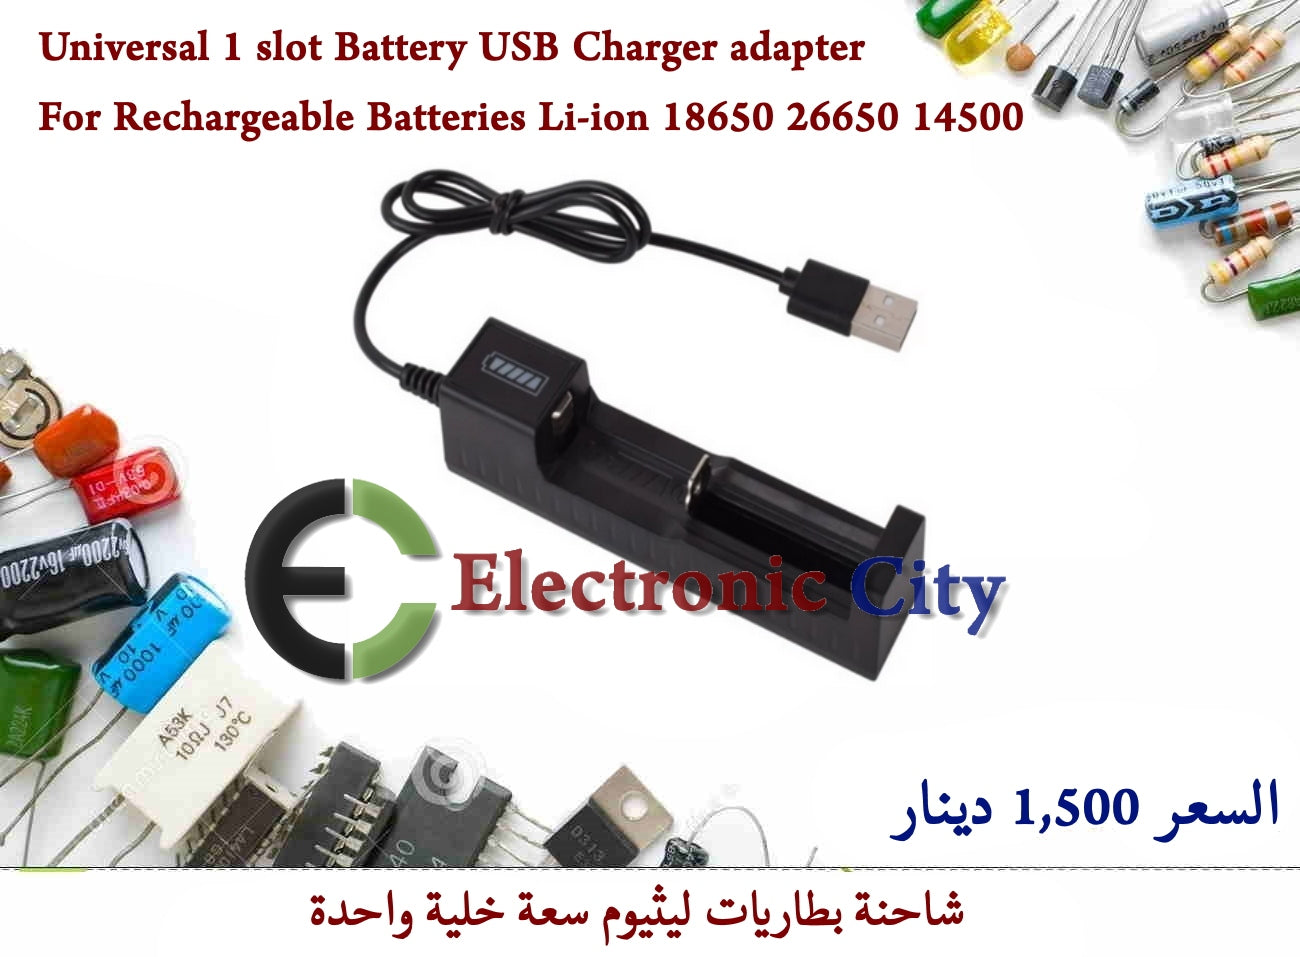 Universal 1 slot Battery USB Charger adapter For Rechargeable Batteries Li-ion 18650 26650 14500